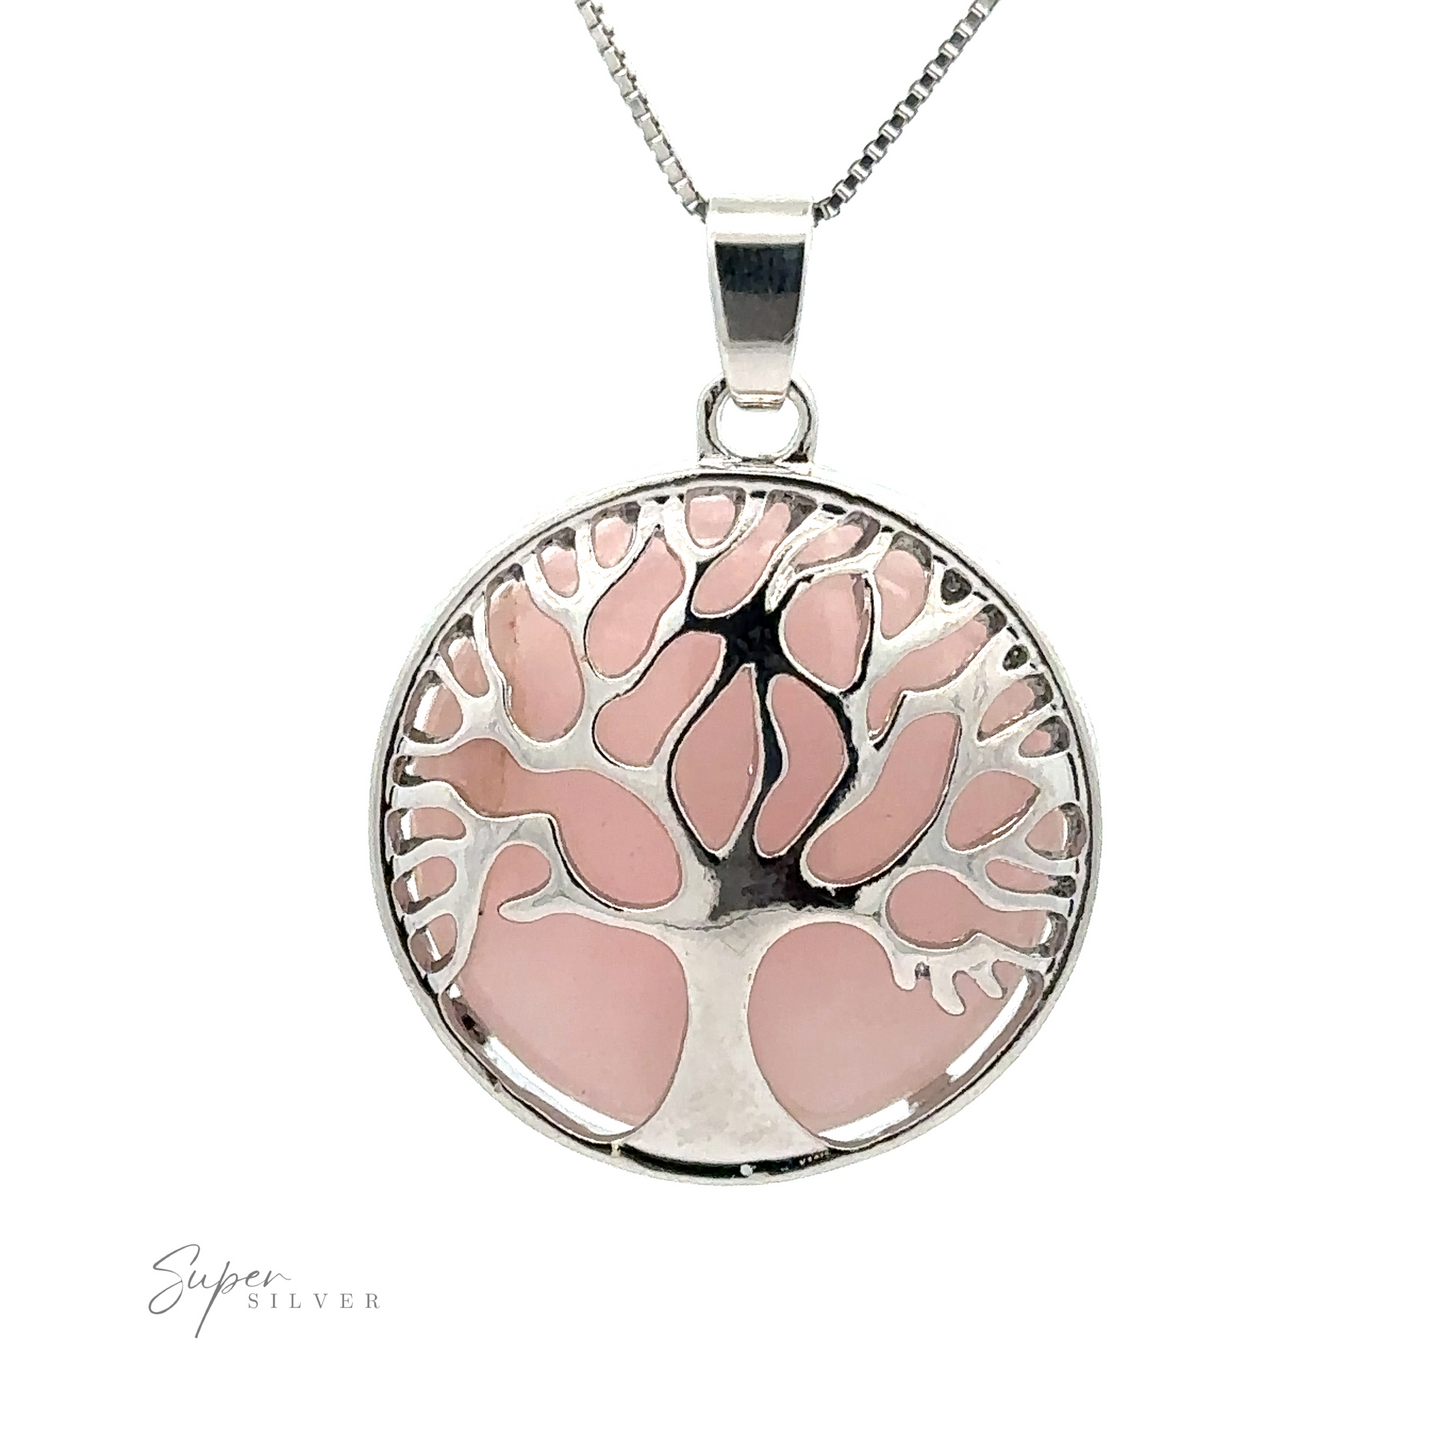 
                  
                    A Tree of Life Pendant with a circular Tree of Life pendant against a pink background. The pendant hangs from a thin chain, and the text "Super Silver" is visible in the bottom left corner.
                  
                